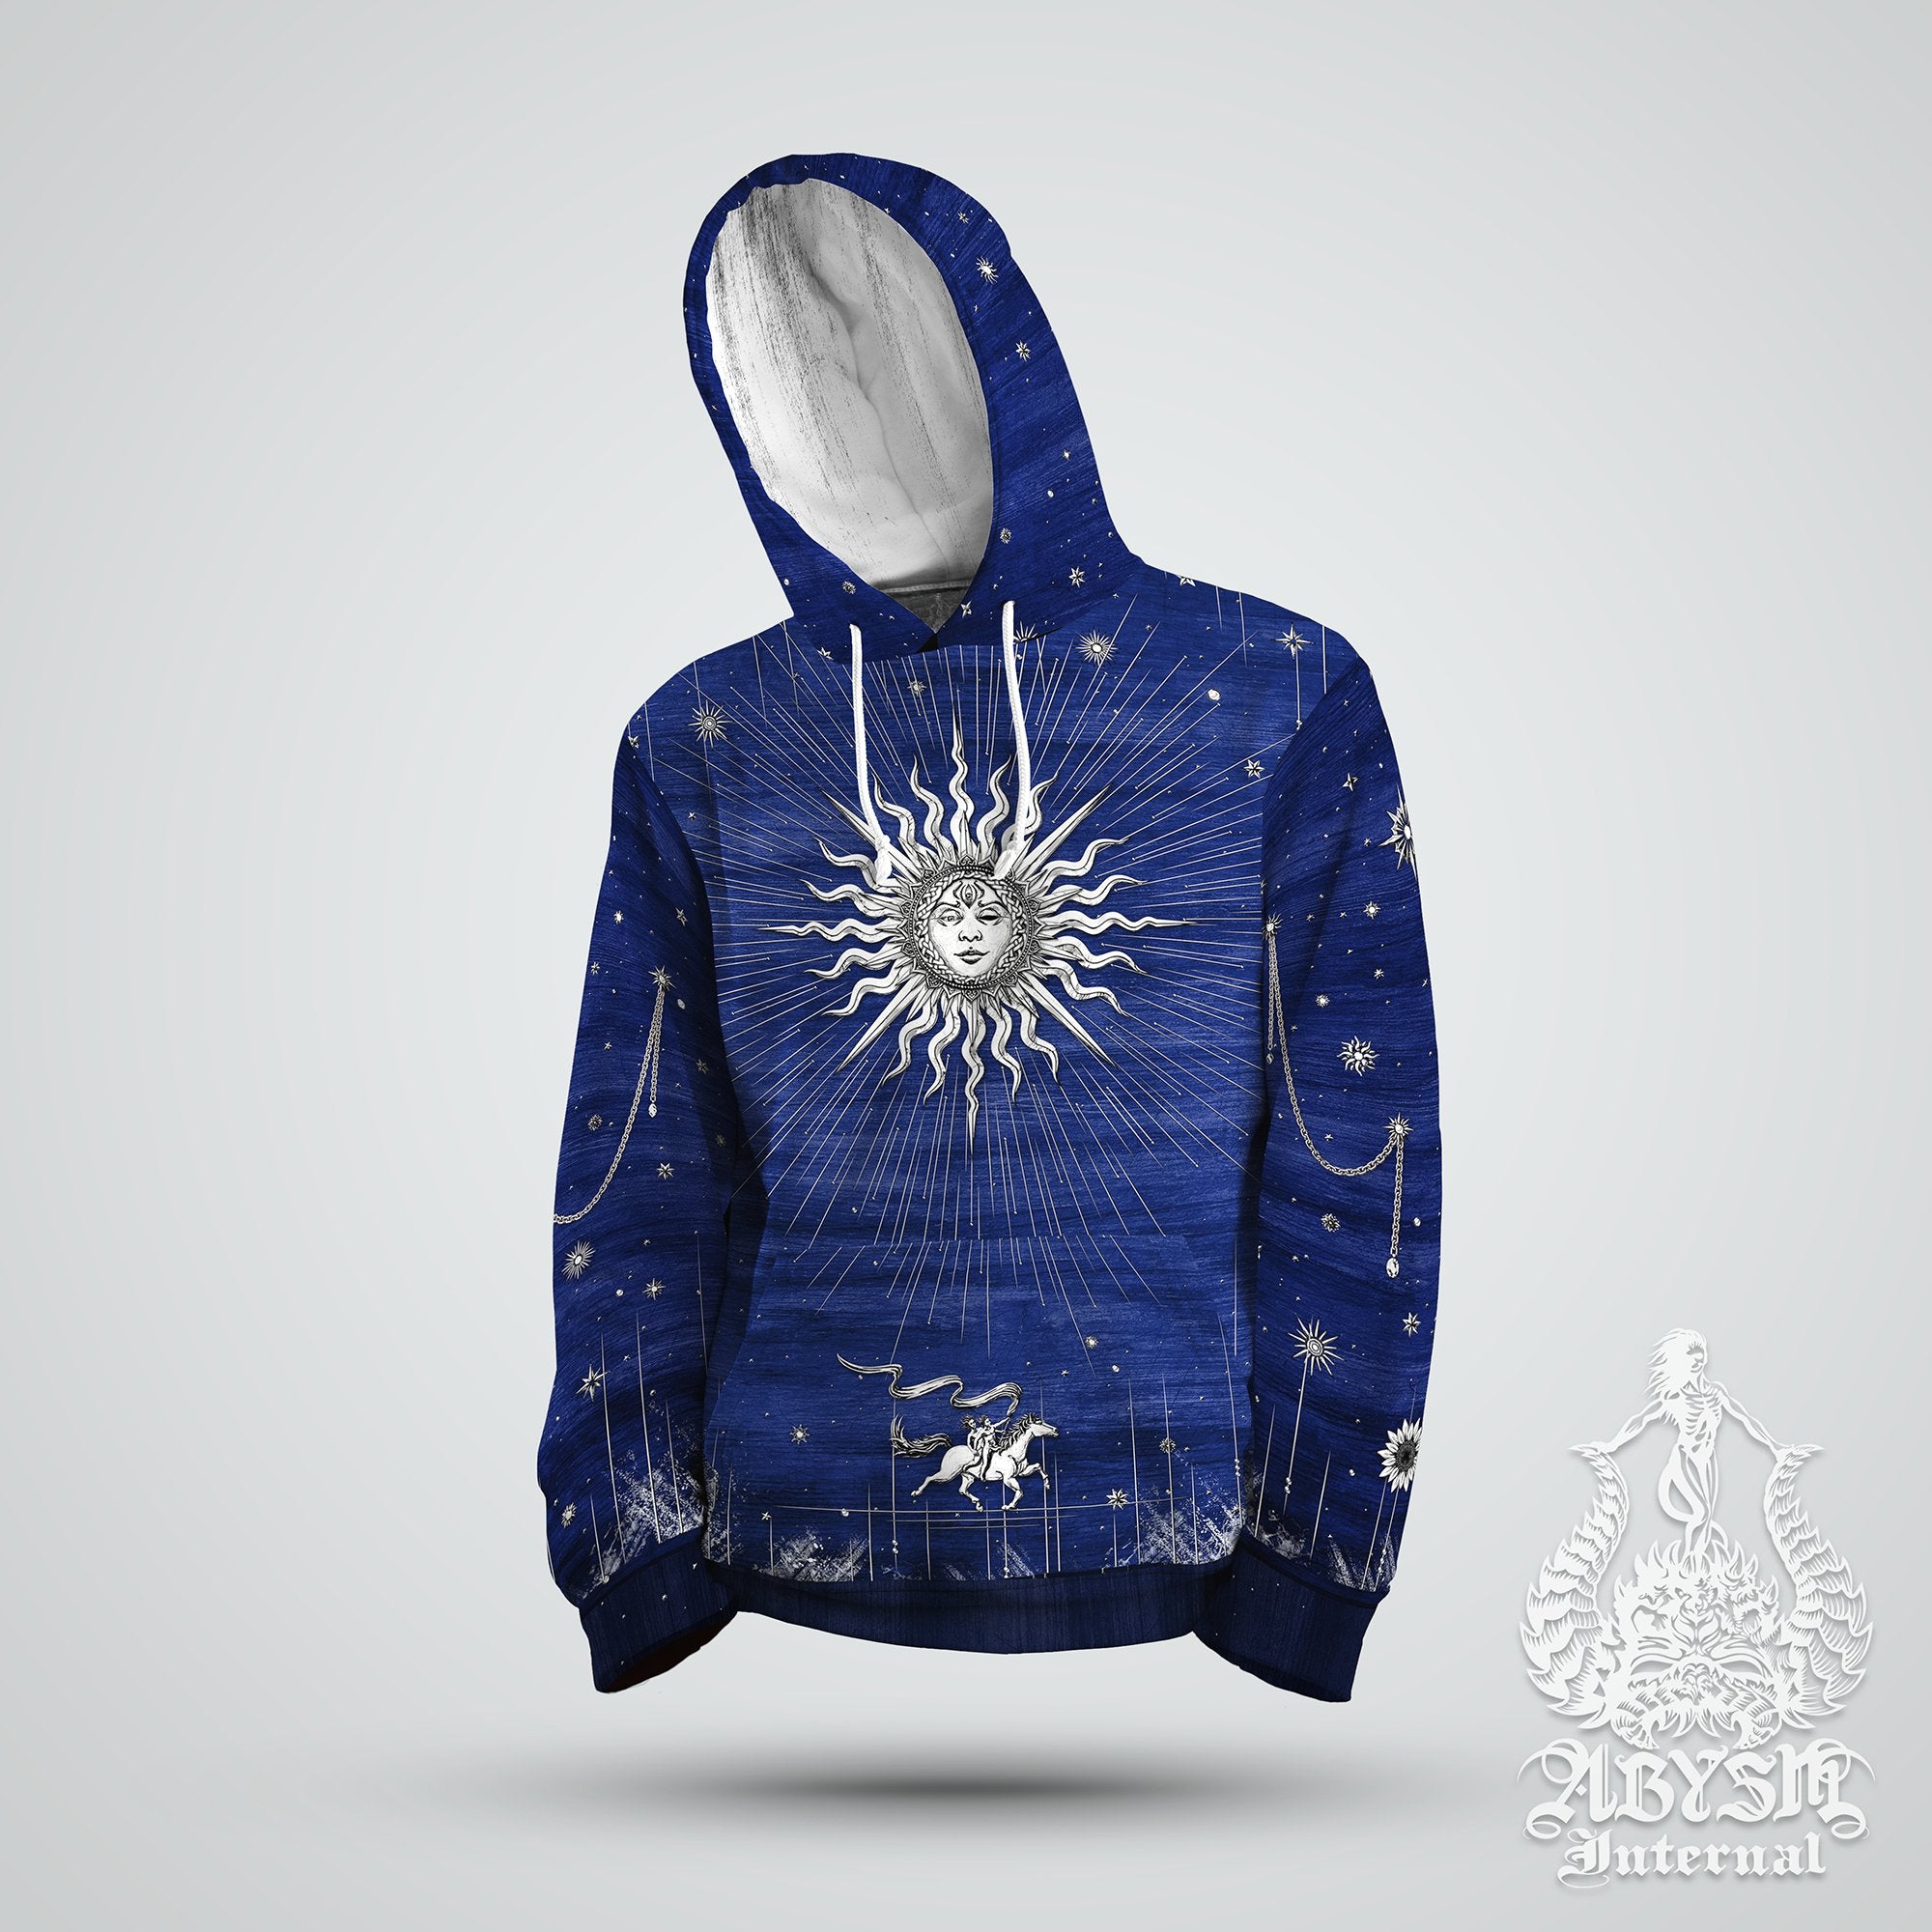 Tarot Sun Hoodie, Magic Arcana Pullover, Indie Sweater, Esoteric Street Outfit, Positive Streetwear, Boho Clothing, Unisex - White and 6 Colors - Abysm Internal